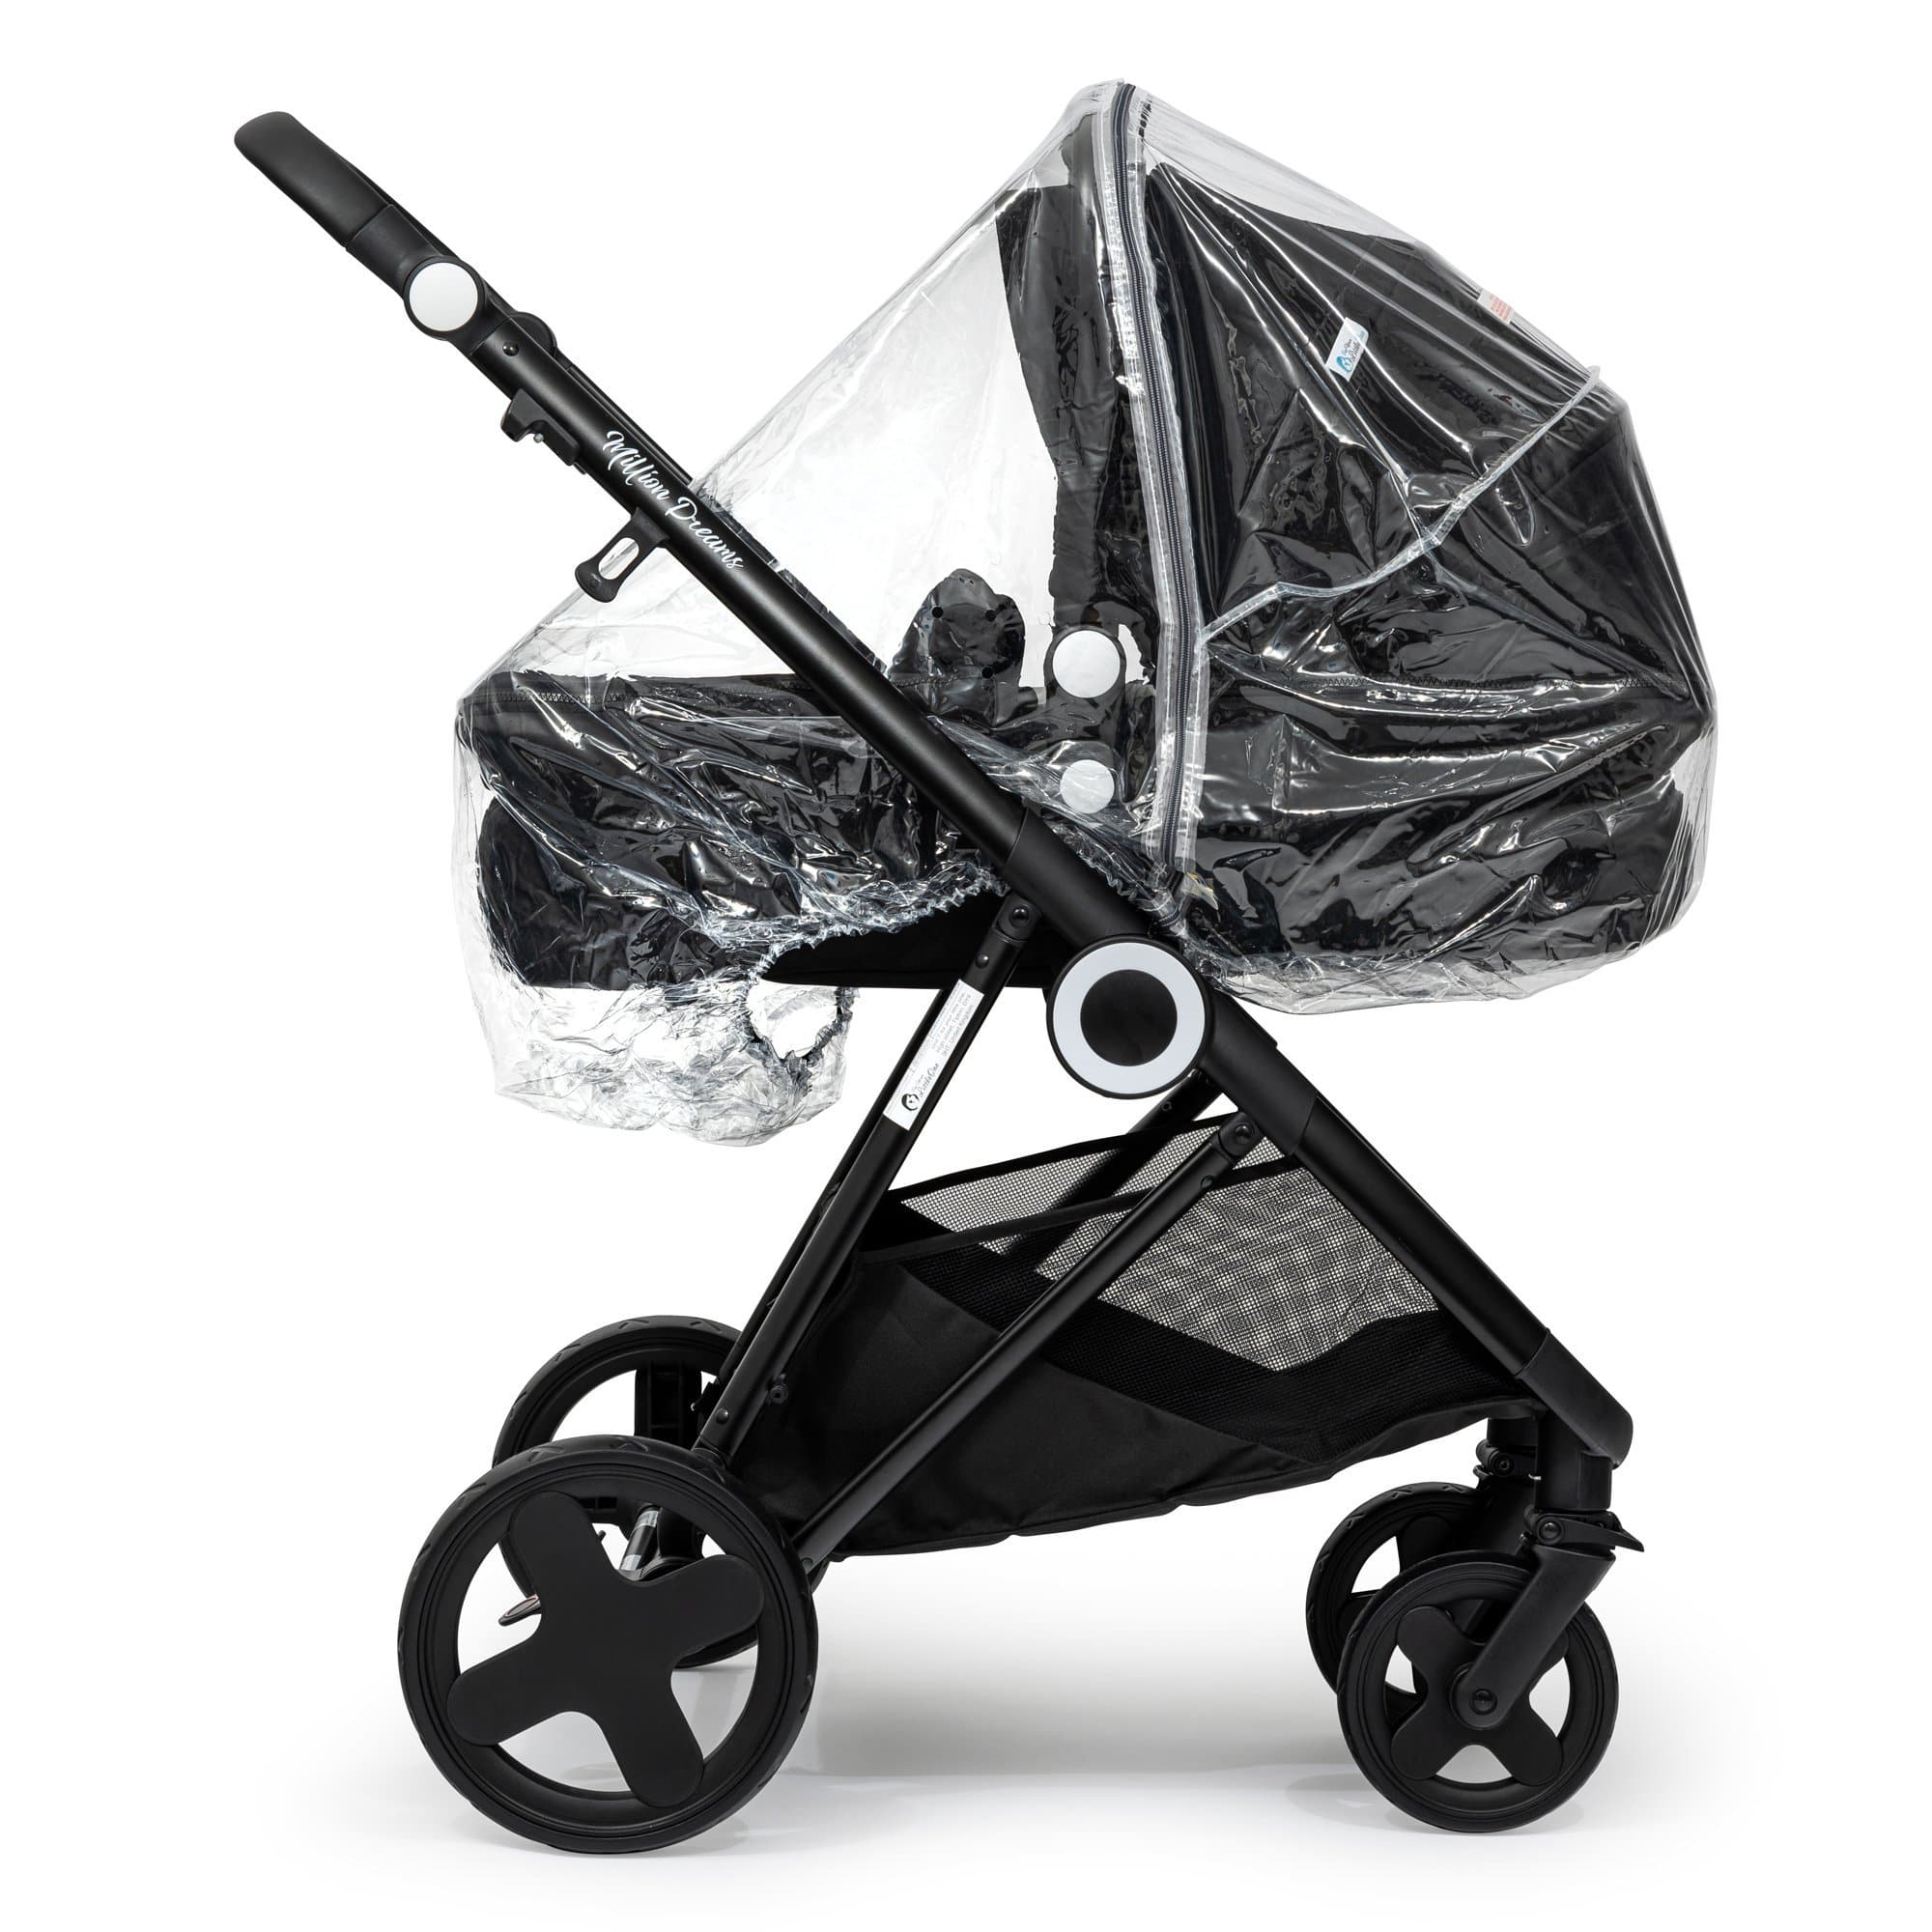 2 in 1 Rain Cover Compatible with Mountain Buggy - Fits All Models - For Your Little One